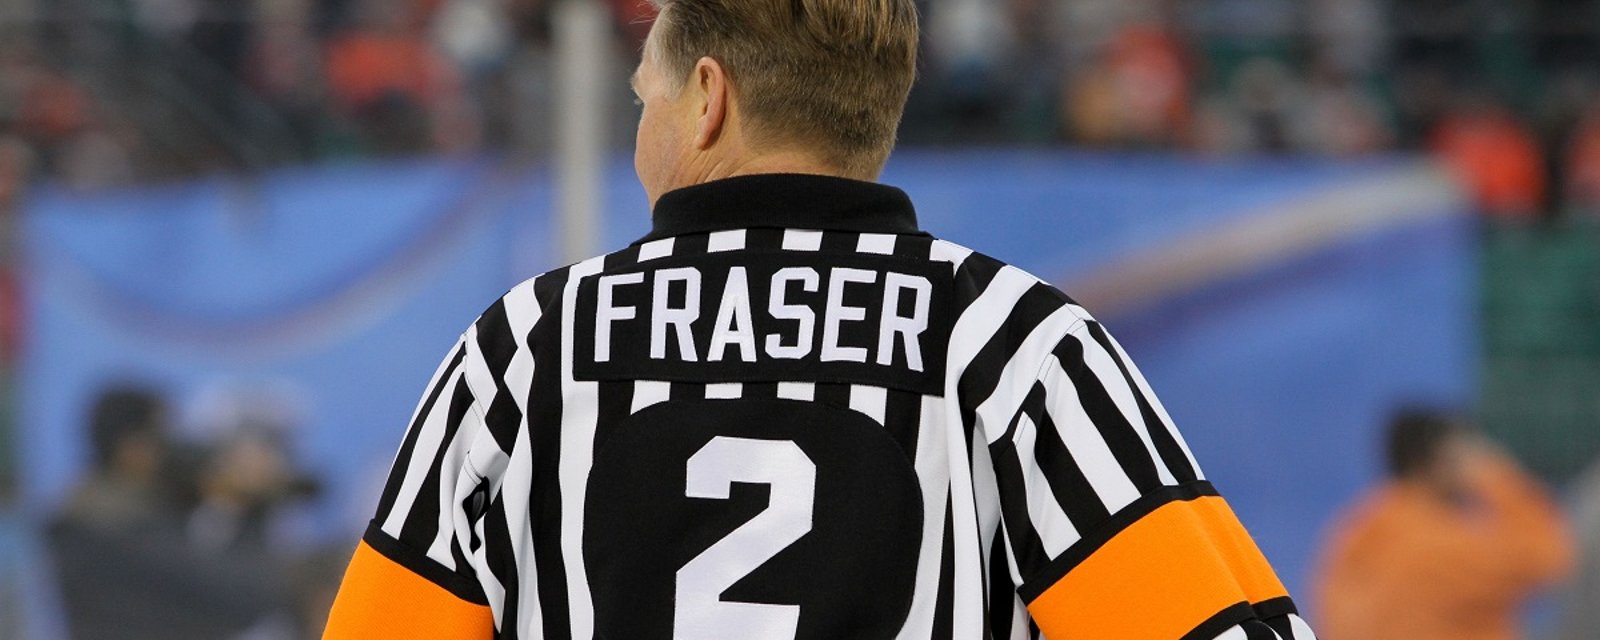 Former NHL referee Kerry Fraser calls out Crosby after Game 5 antics. 